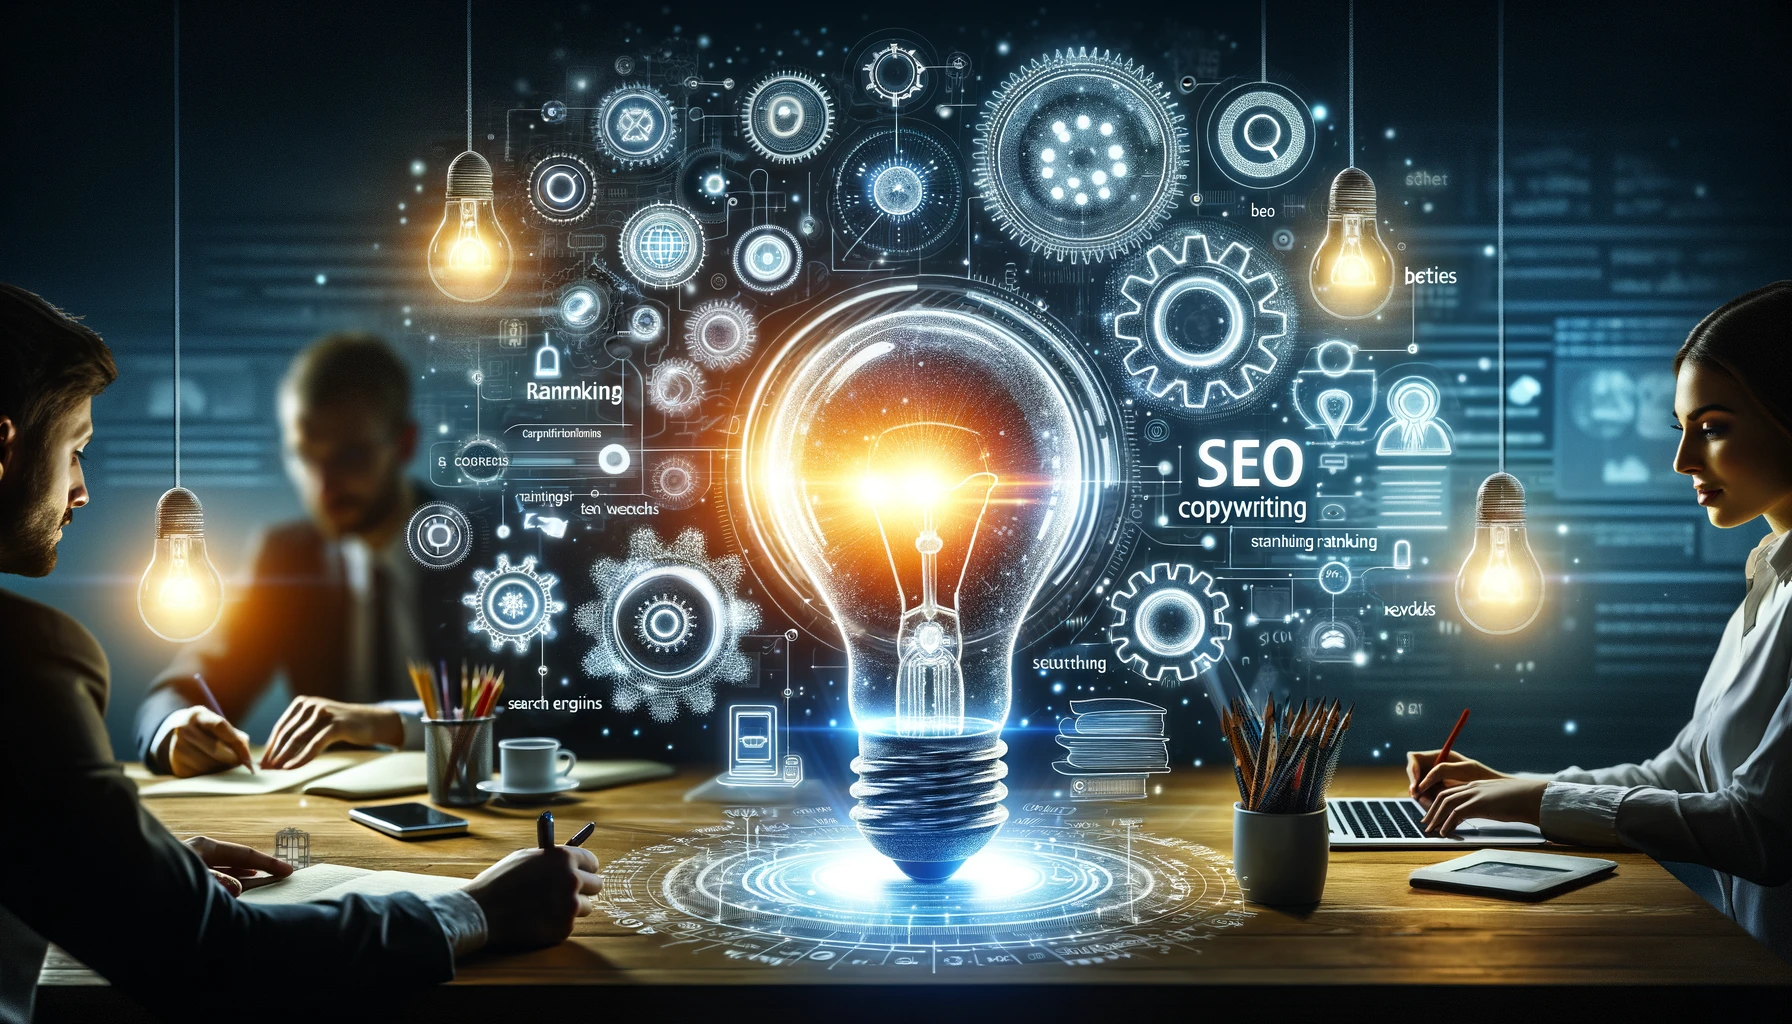 A brainstorming session on SEO strategy with a glowing light bulb and surrounding icons for search engines, rankings, and keywords, set against a backdrop of gears and digital patterns, emphasizing Keyword Rich Copywriting.